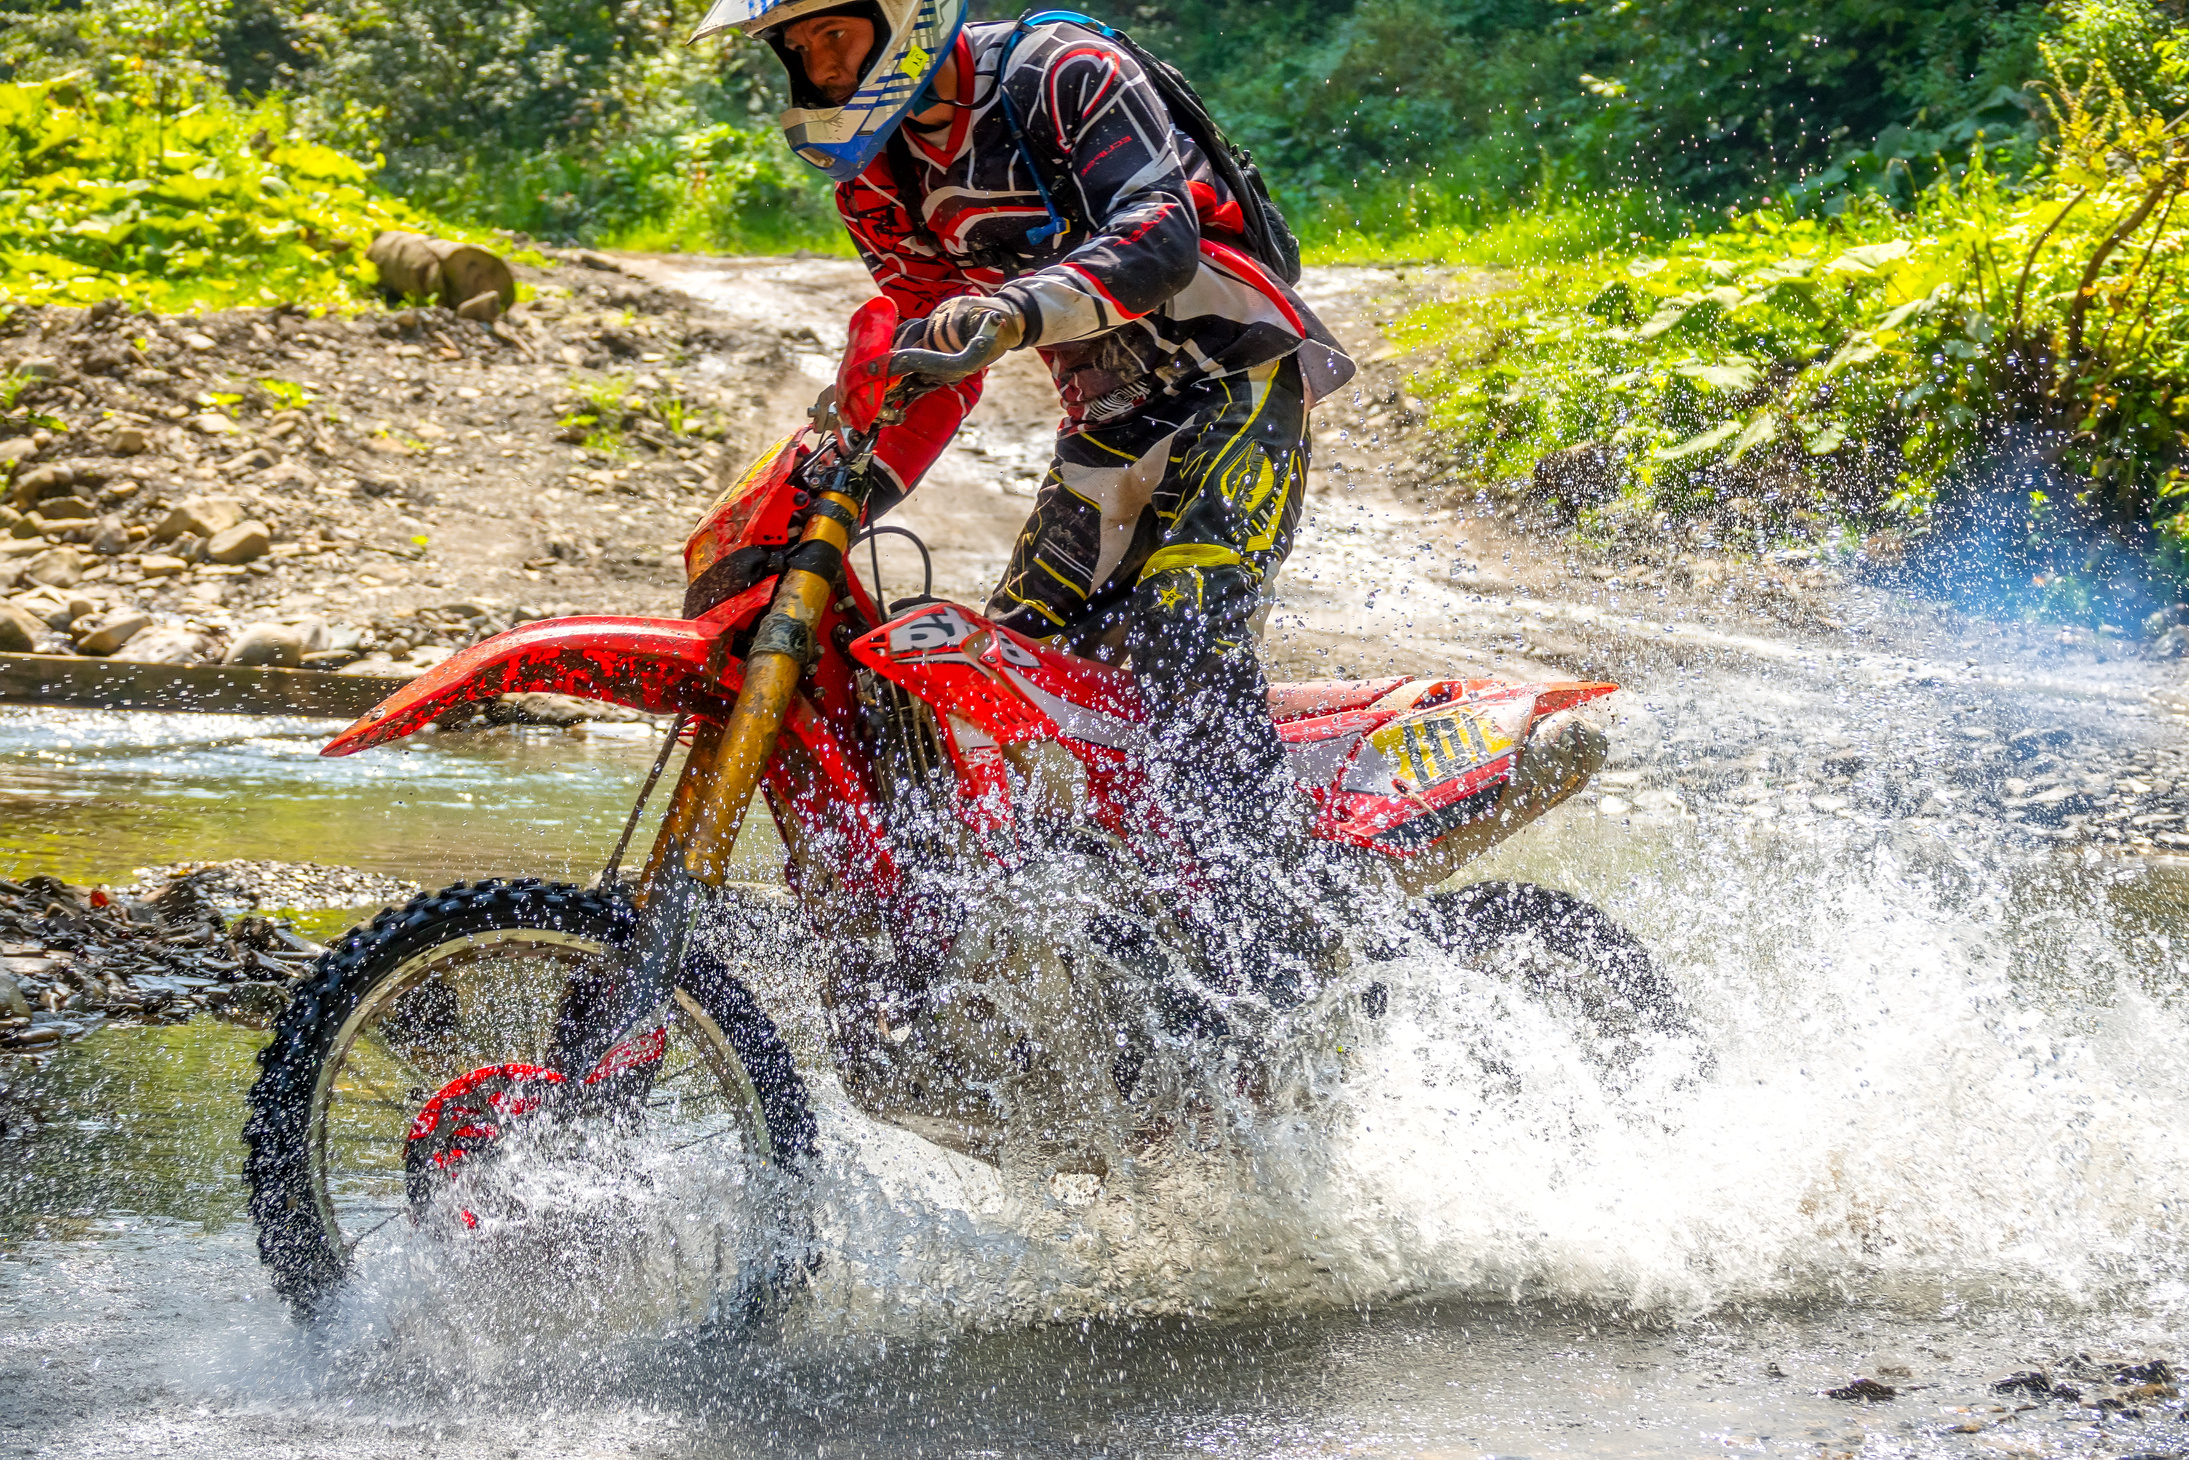 Motorcycle Enduro and Athlete in Water Spray